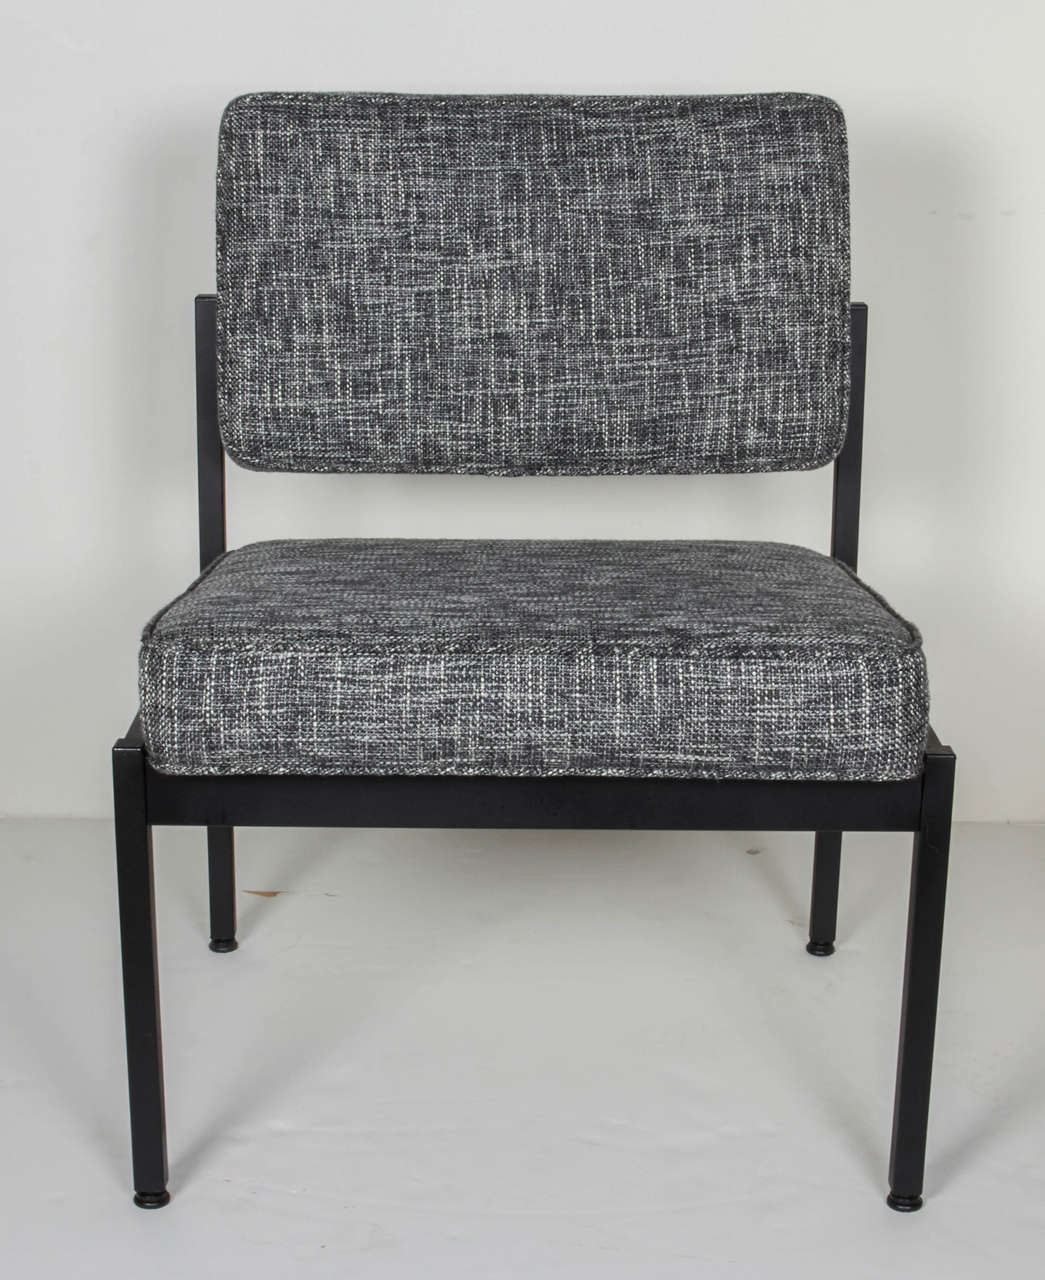 Mid-century modern industrial style chairs with streamline design and floating seat and back cushions. Fine example of utilitarian furniture, great as office chairs or easy chairs.  Satin black enameled metal frame is complimented by newly